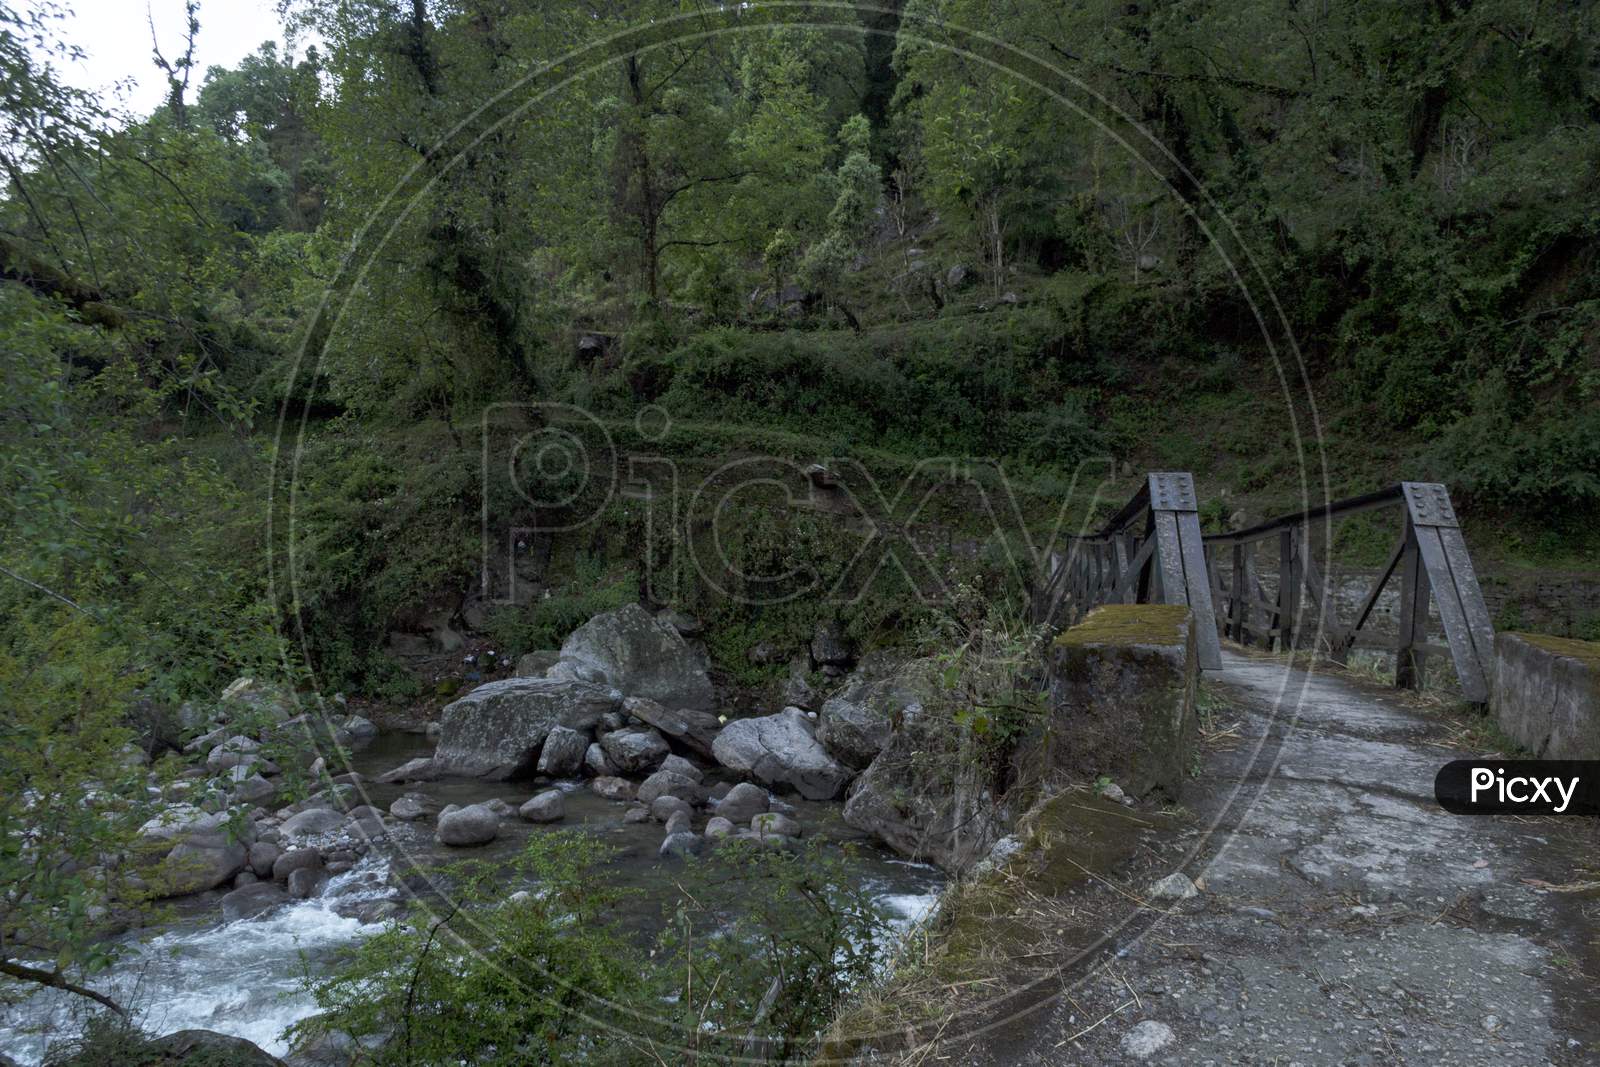 A Nice Landscape Of Rapid Mountain River Balkhila Flowing Under A Bridge In A Small Village.